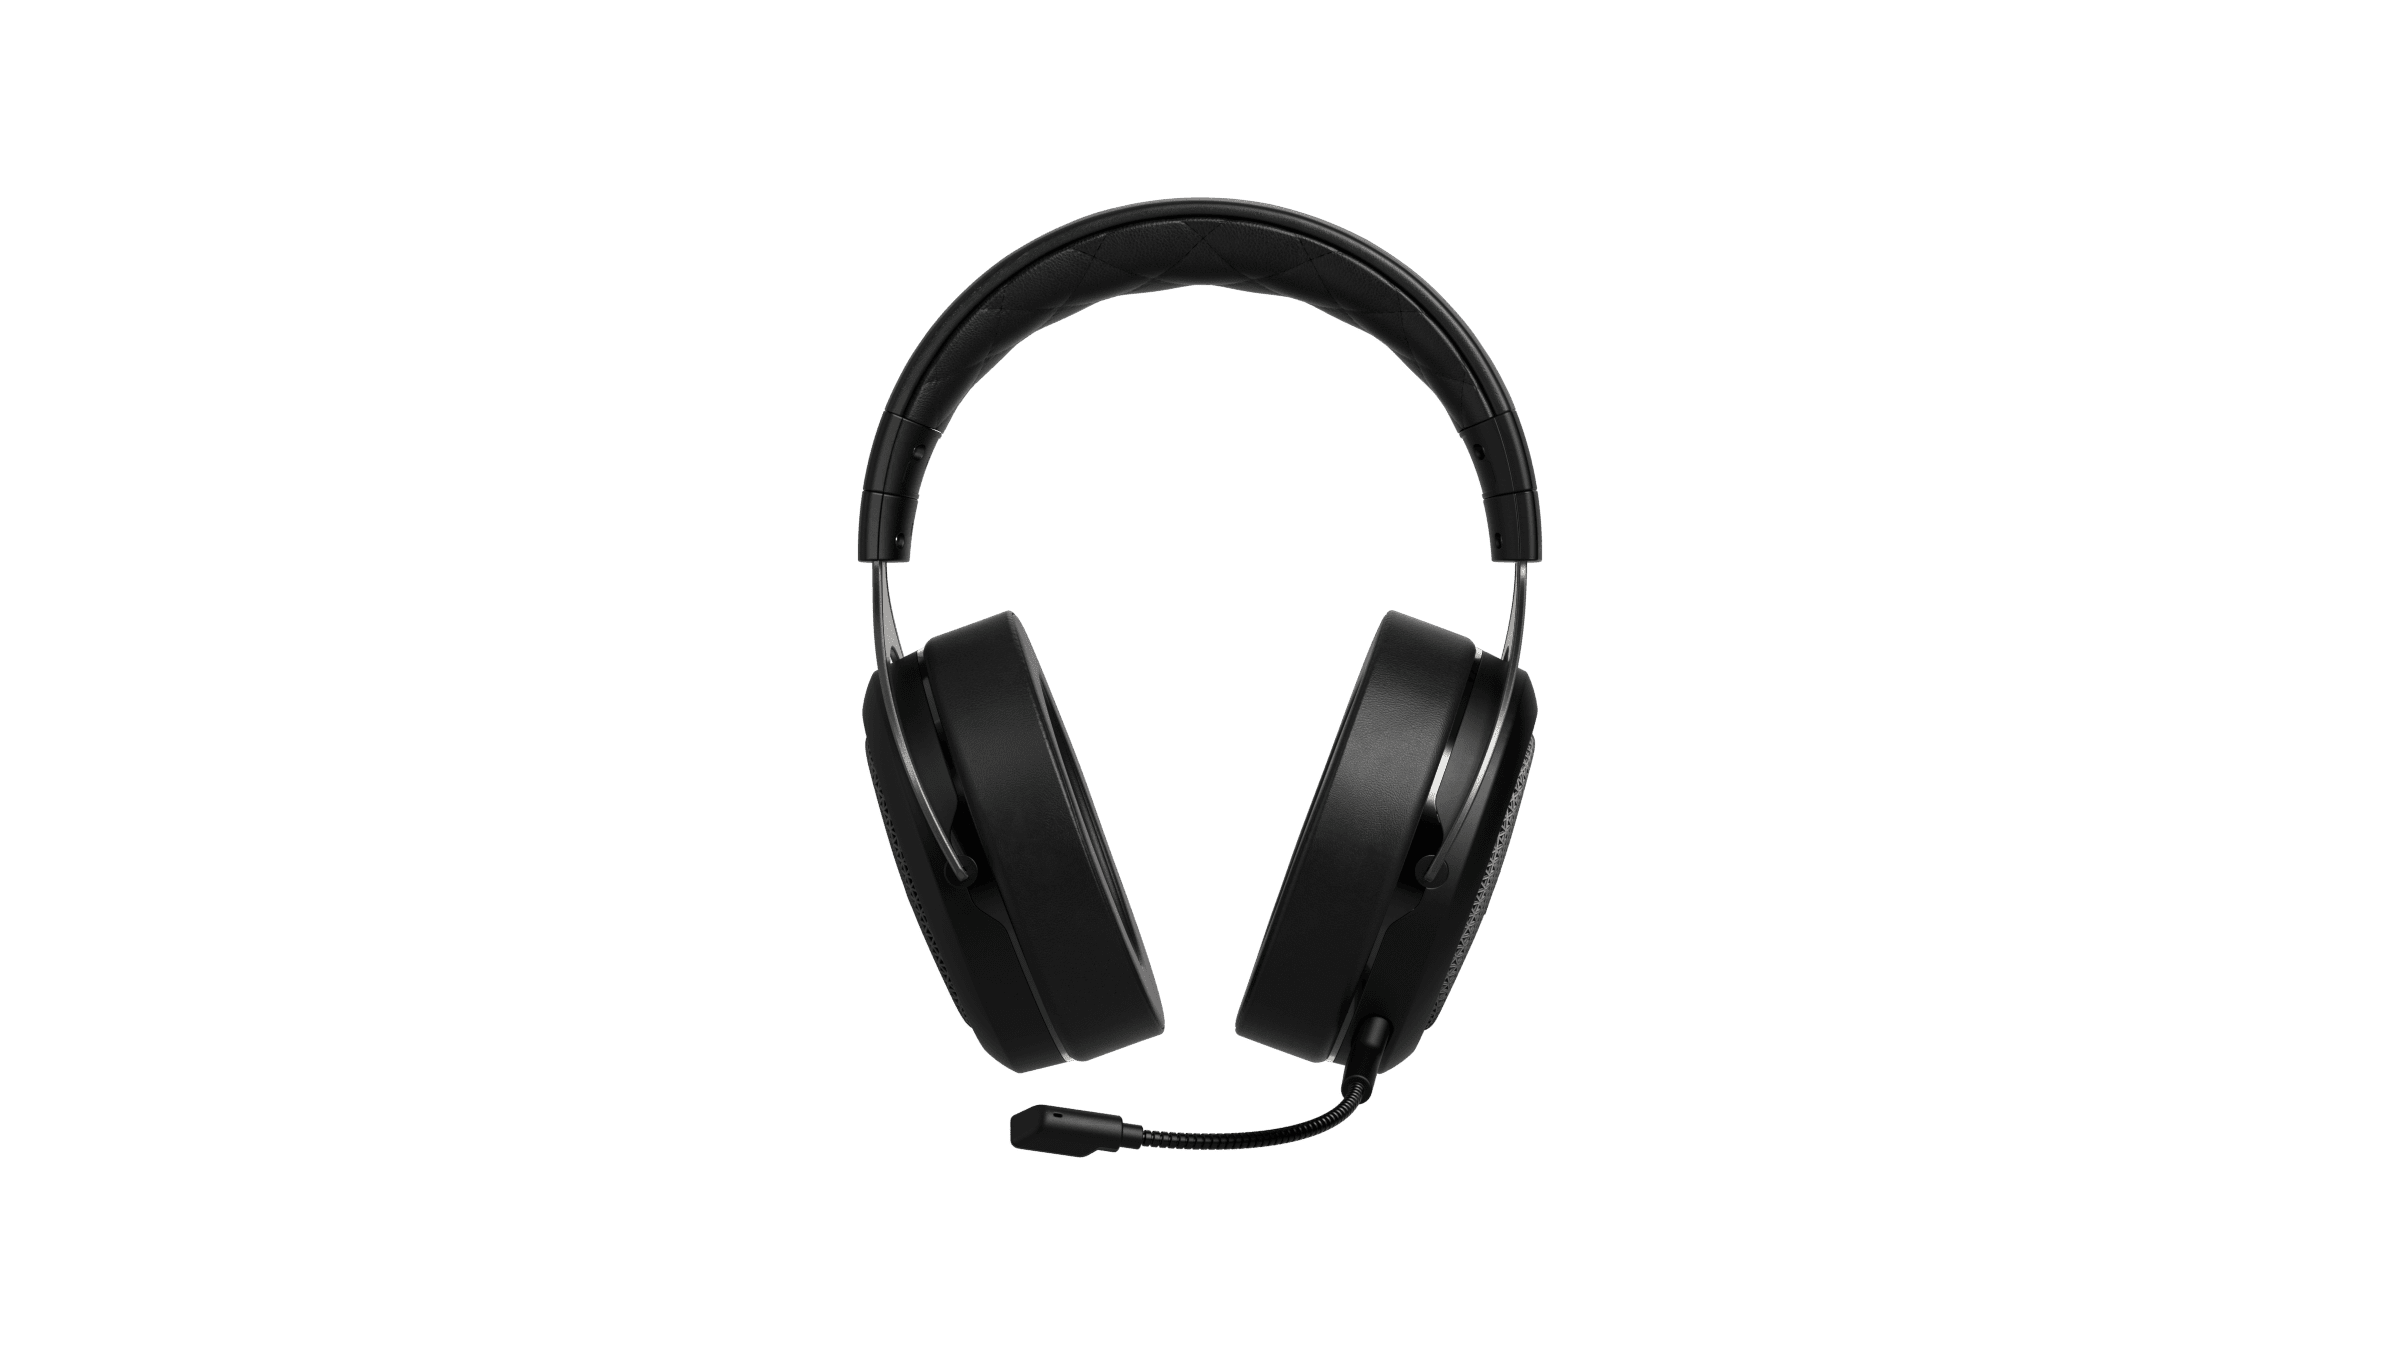 HS75 XB WIRELESS Gaming Headset for Xbox Series X and Xbox One